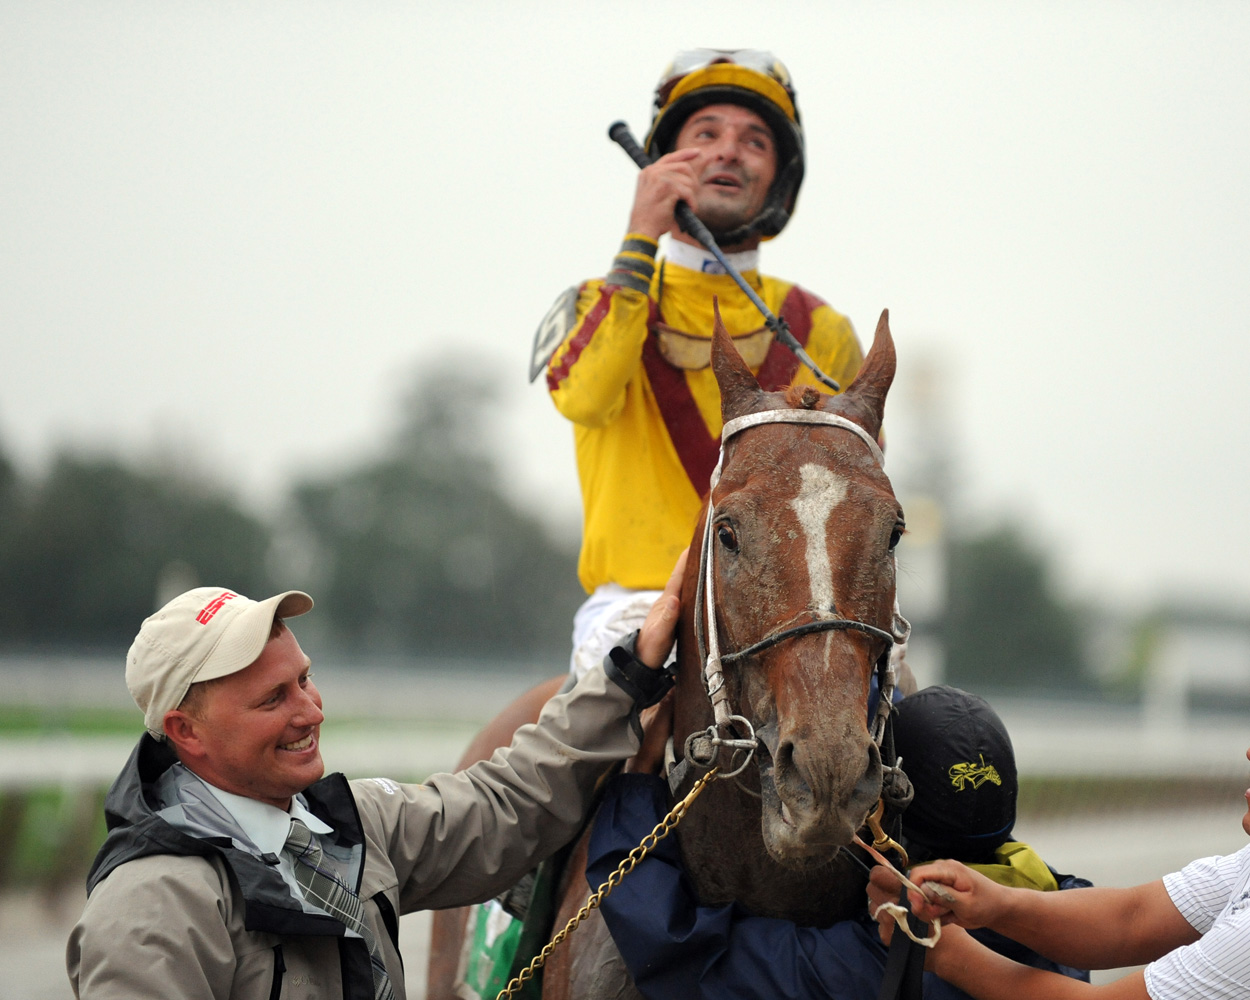 Curlin and Robby Albarado after winning their second consecutive Jockey Club Gold Cup (NYRA)